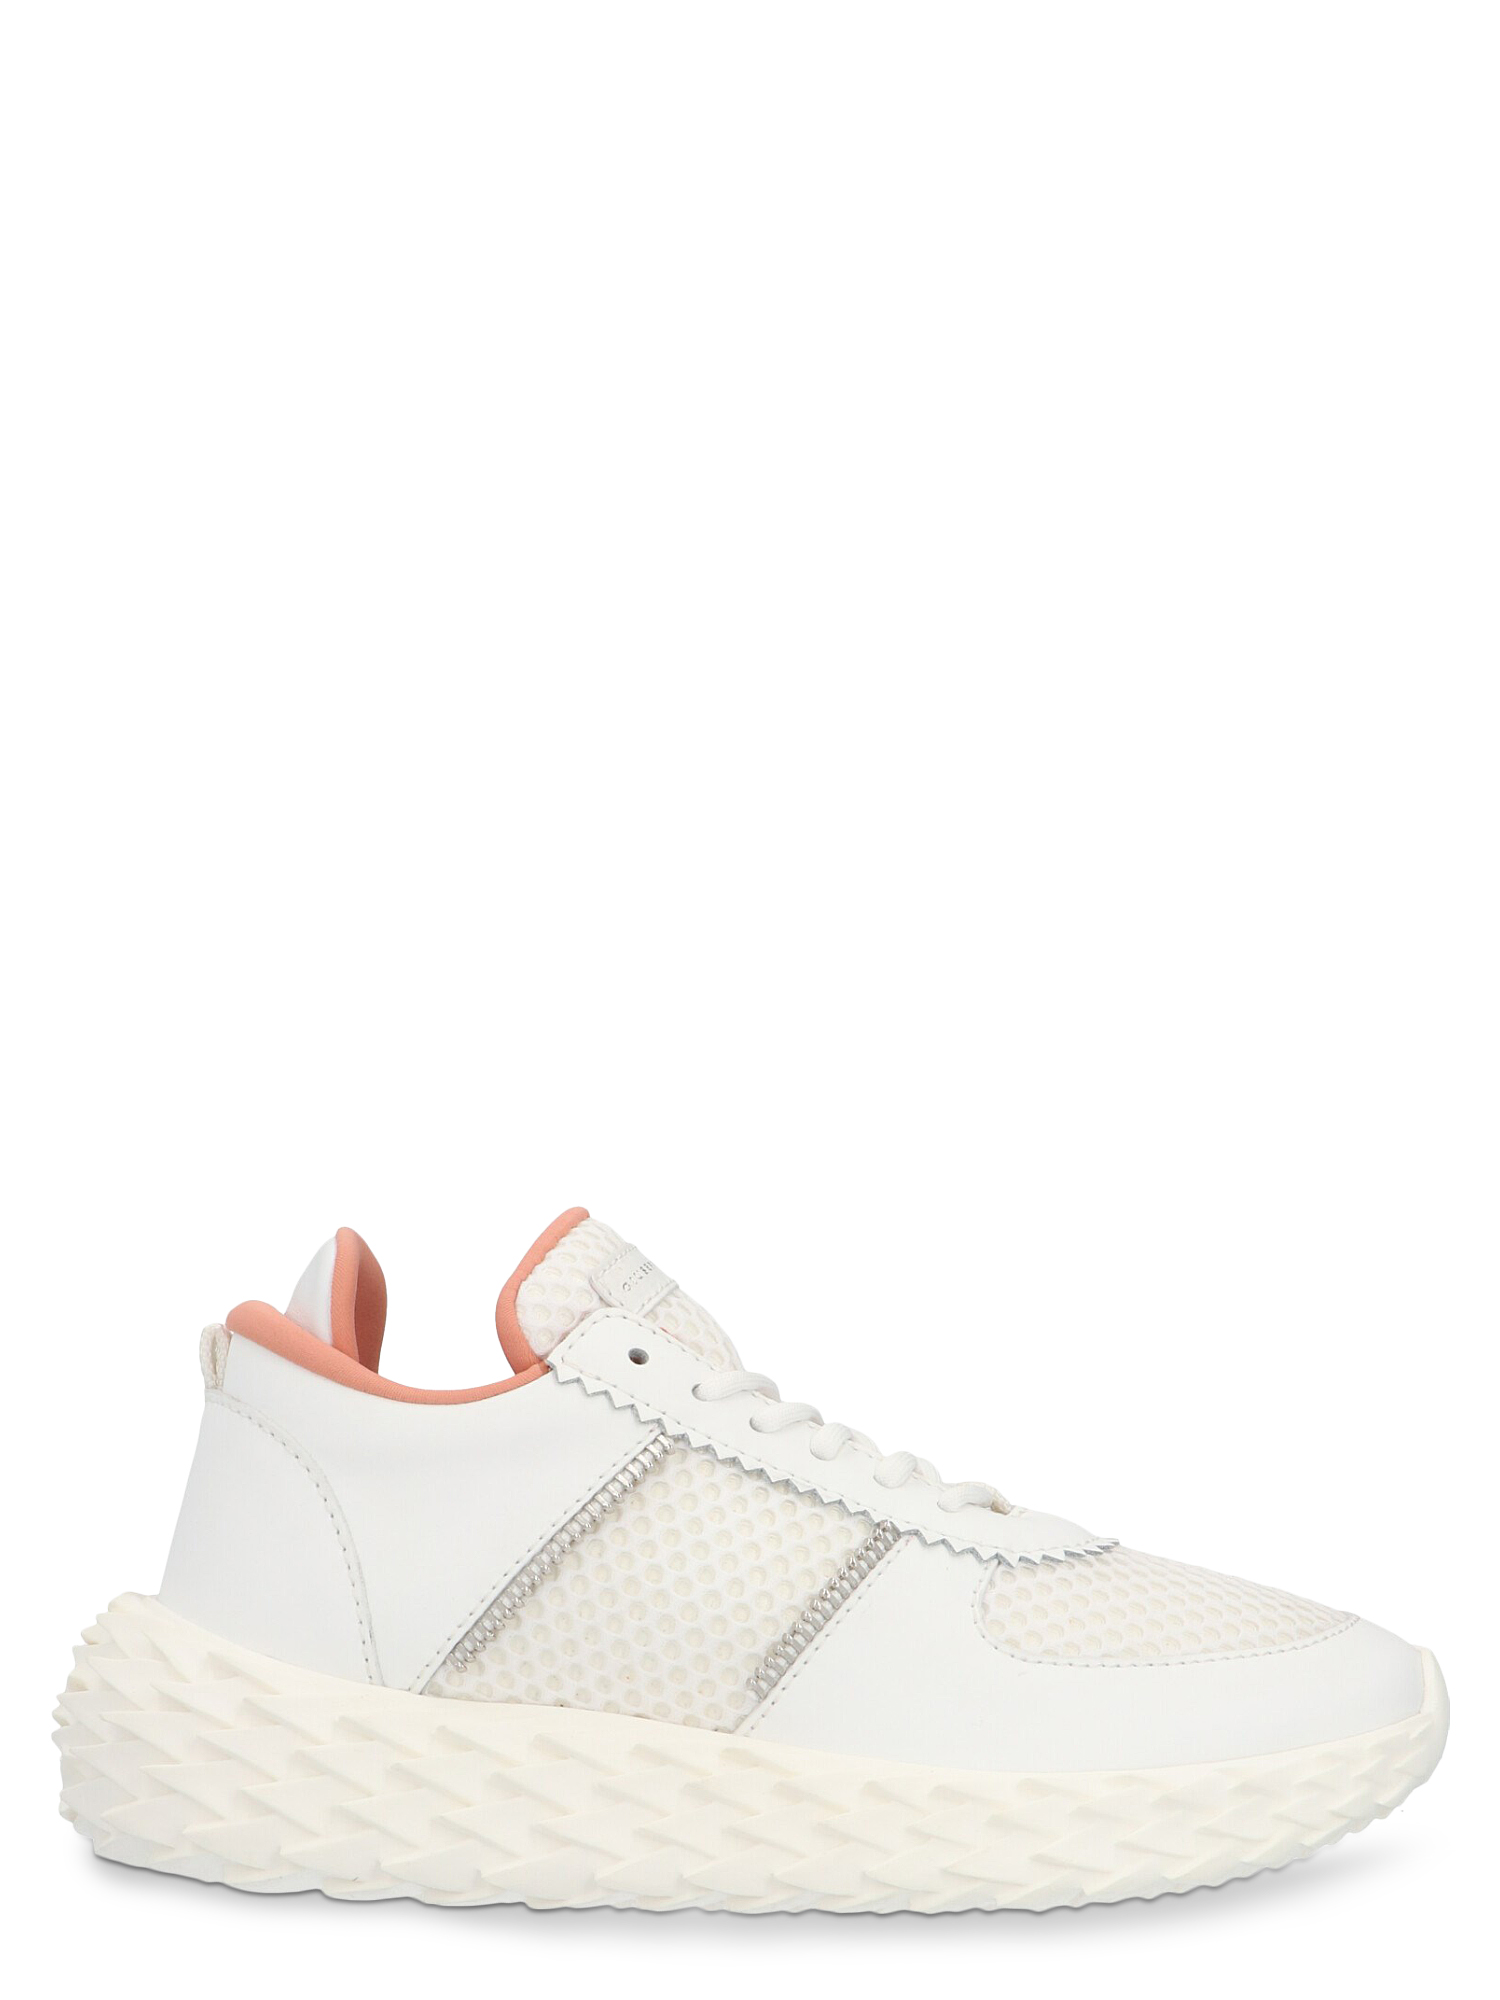 'New urchin' sneakers